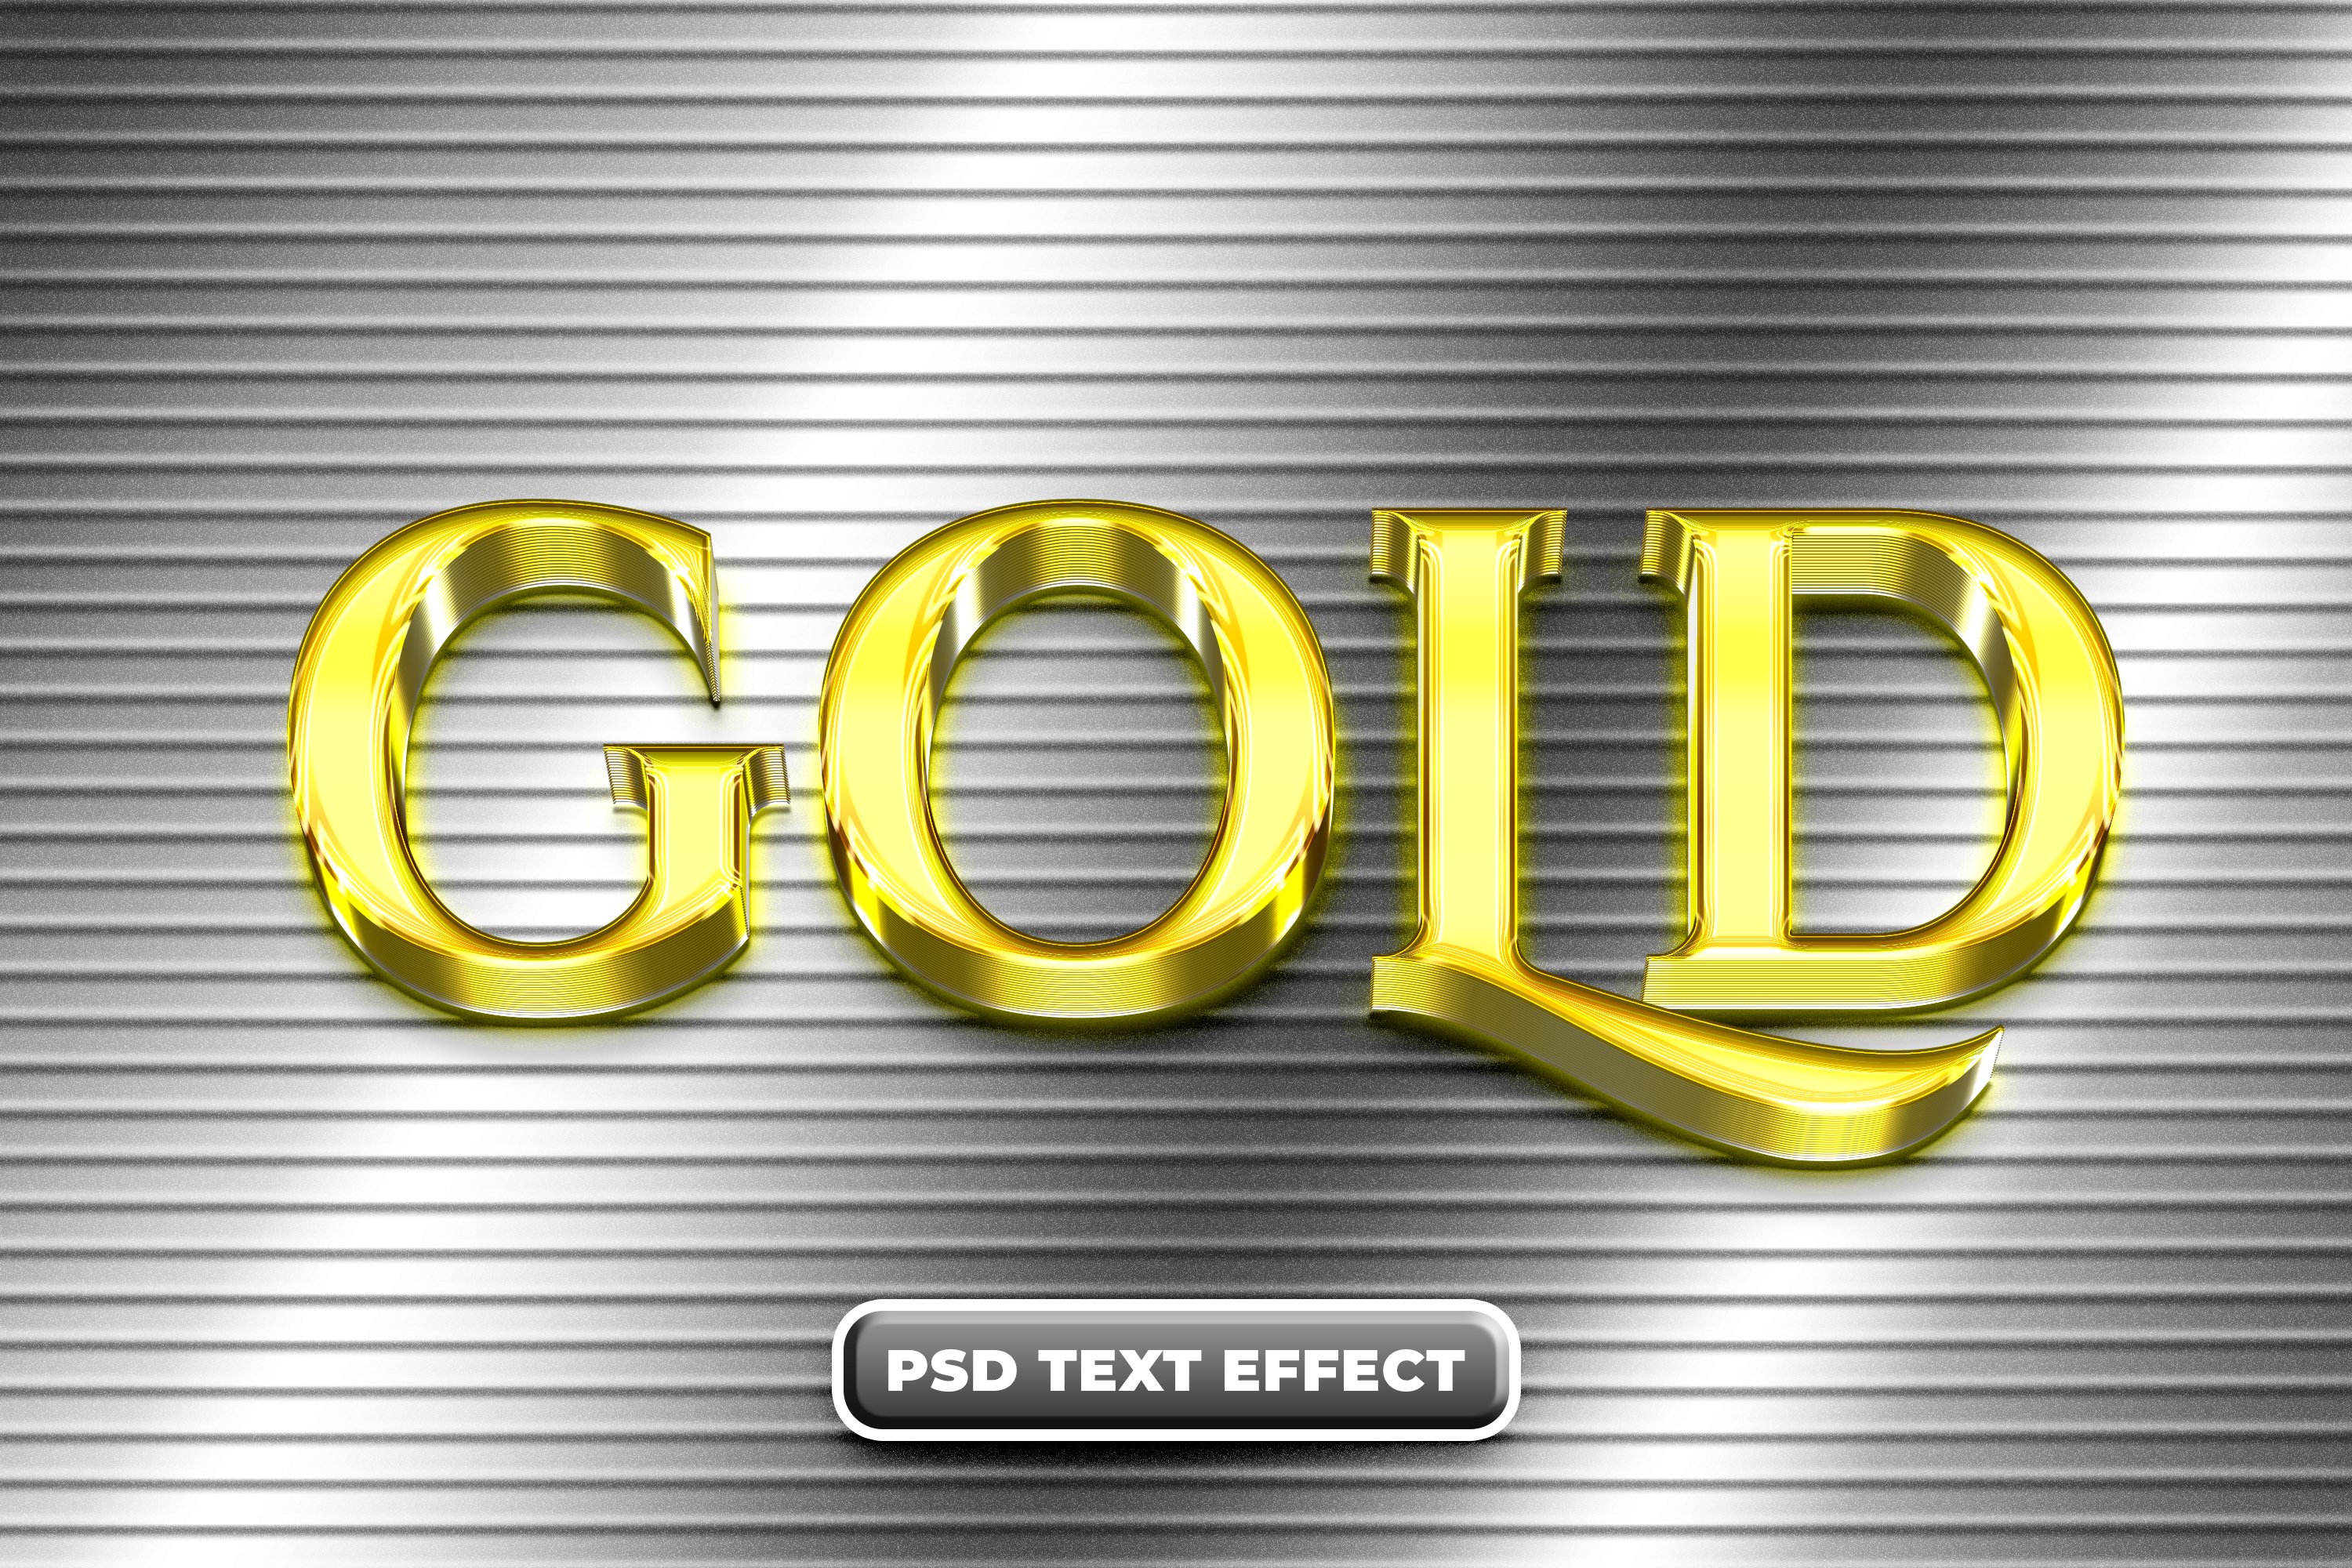 shine gold text effectcover image.